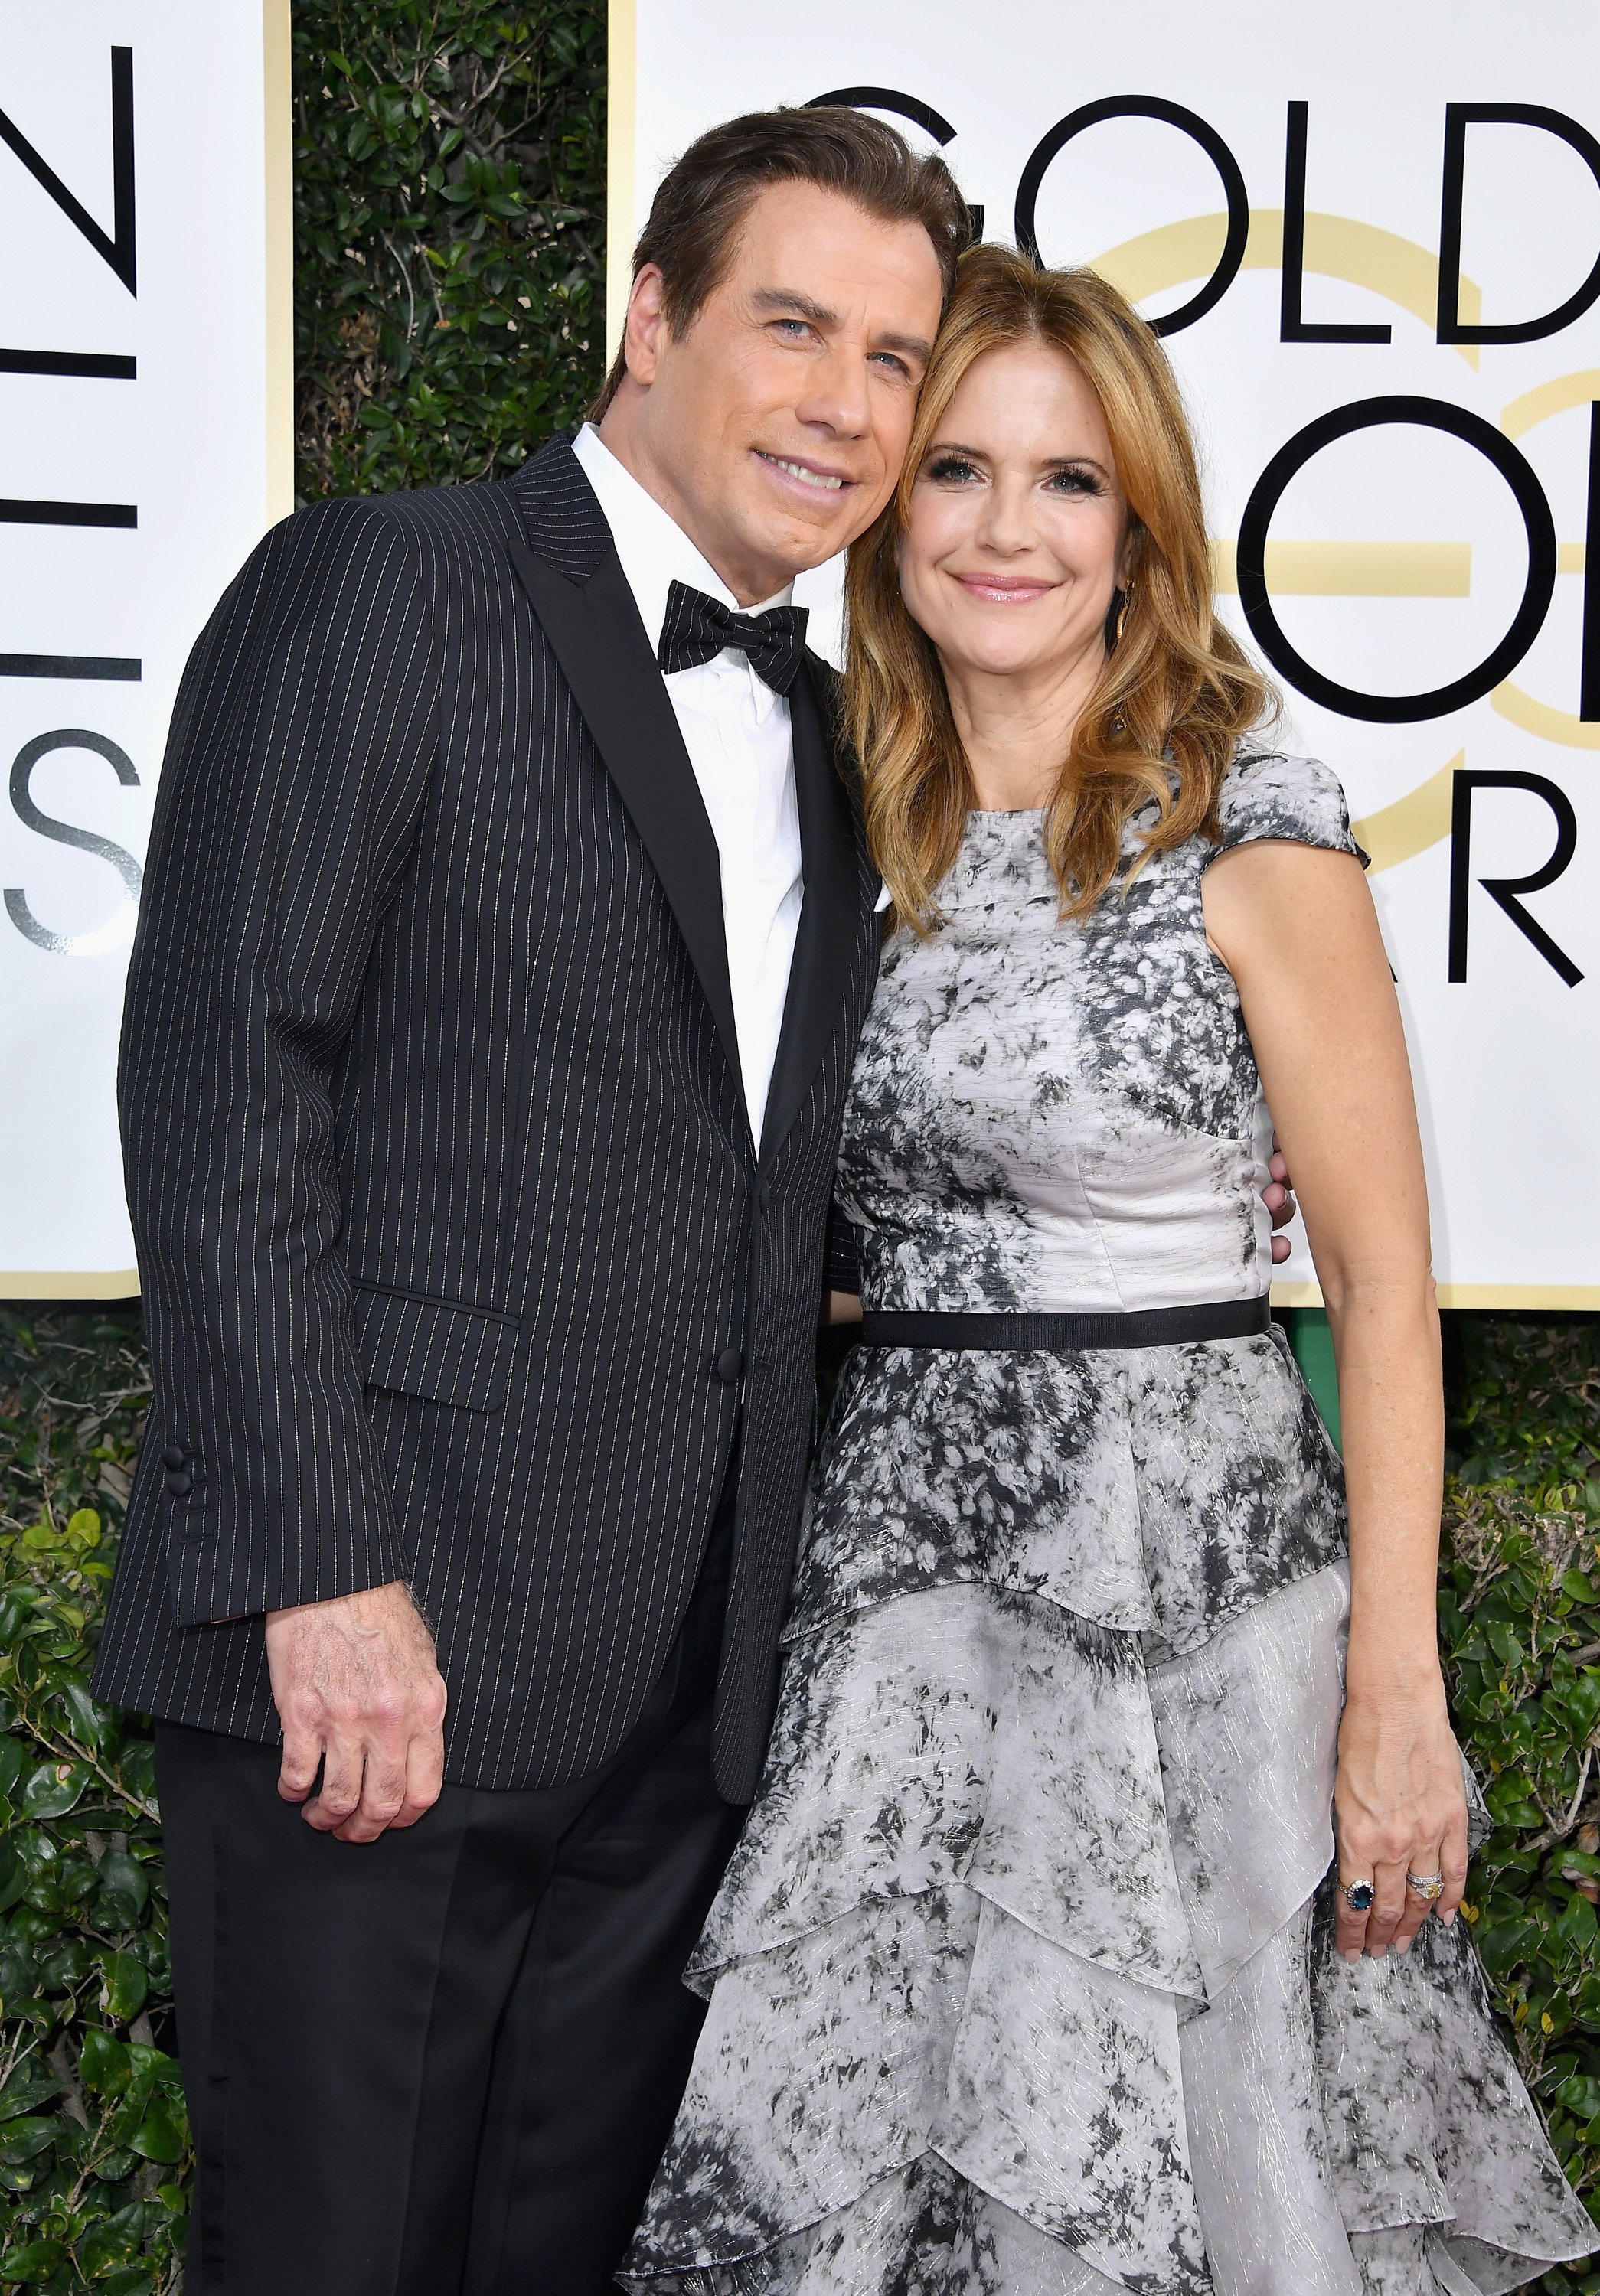 John Travolta and his late wife, Kelly Preston pictured together at the 74th Annual Golden Globe Awards at The Beverly Hilton Hotel, 2017 | Photo: Getty Images